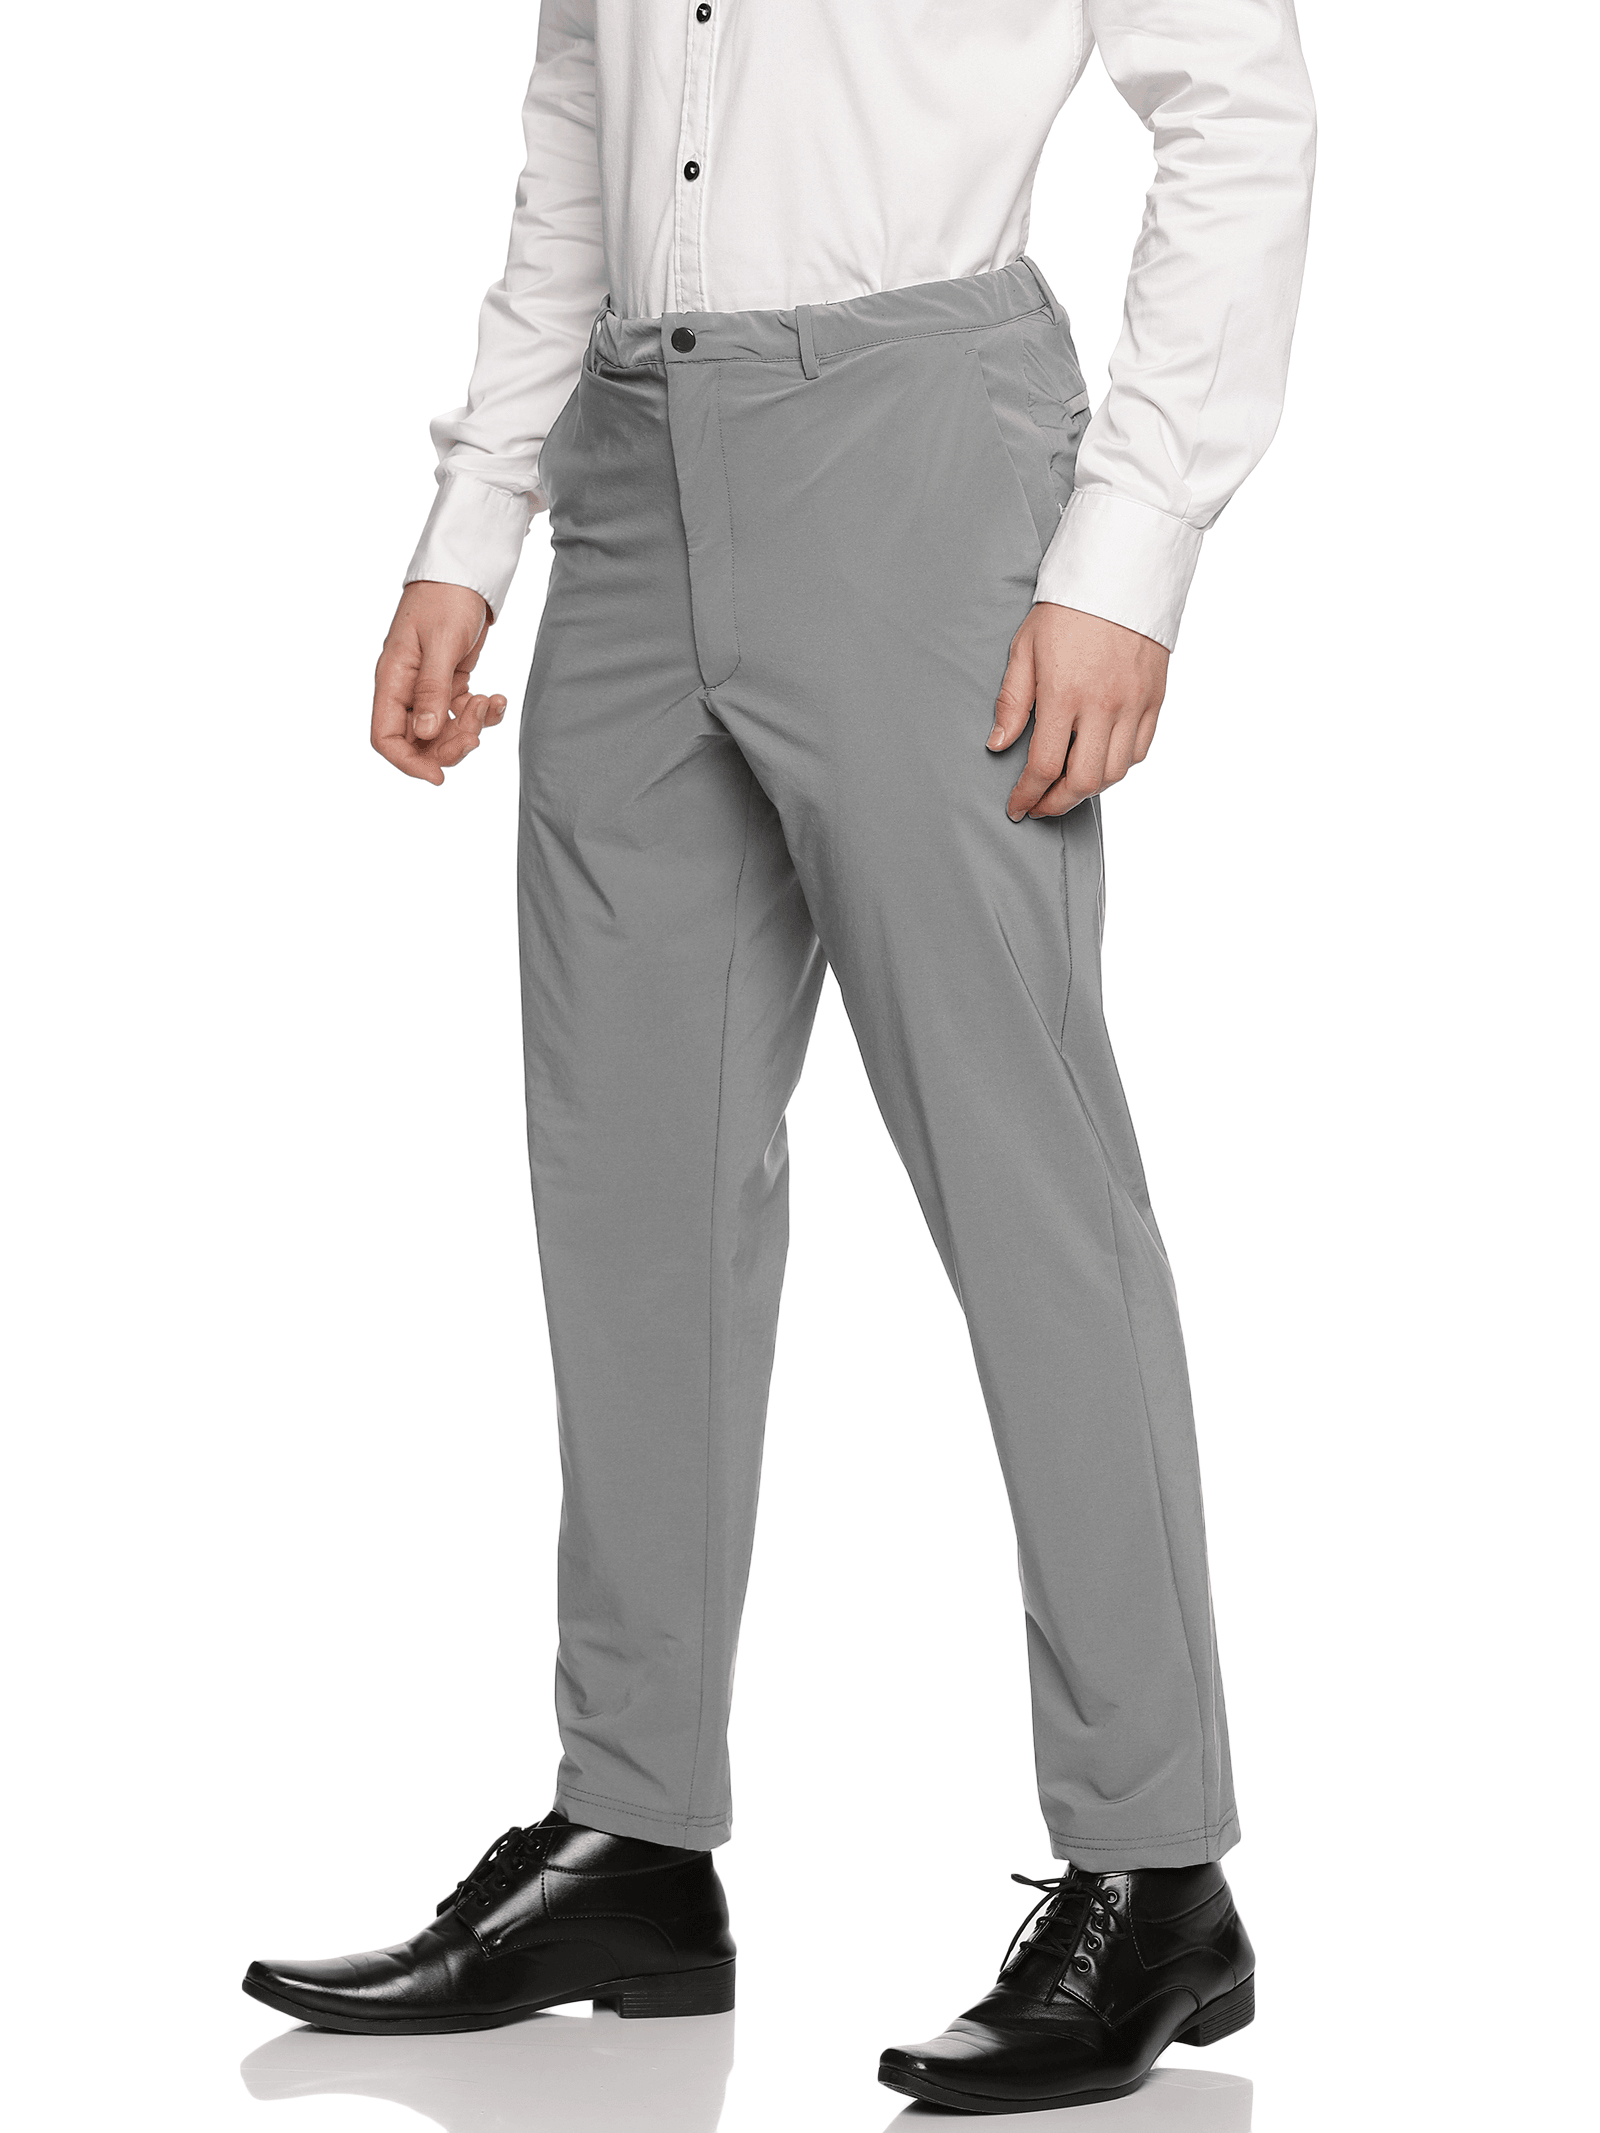 Neo Garments - Multi Cotton Men's Trackpants ( Pack of 2 ) - Buy Neo  Garments - Multi Cotton Men's Trackpants ( Pack of 2 ) Online at Best  Prices in India on Snapdeal